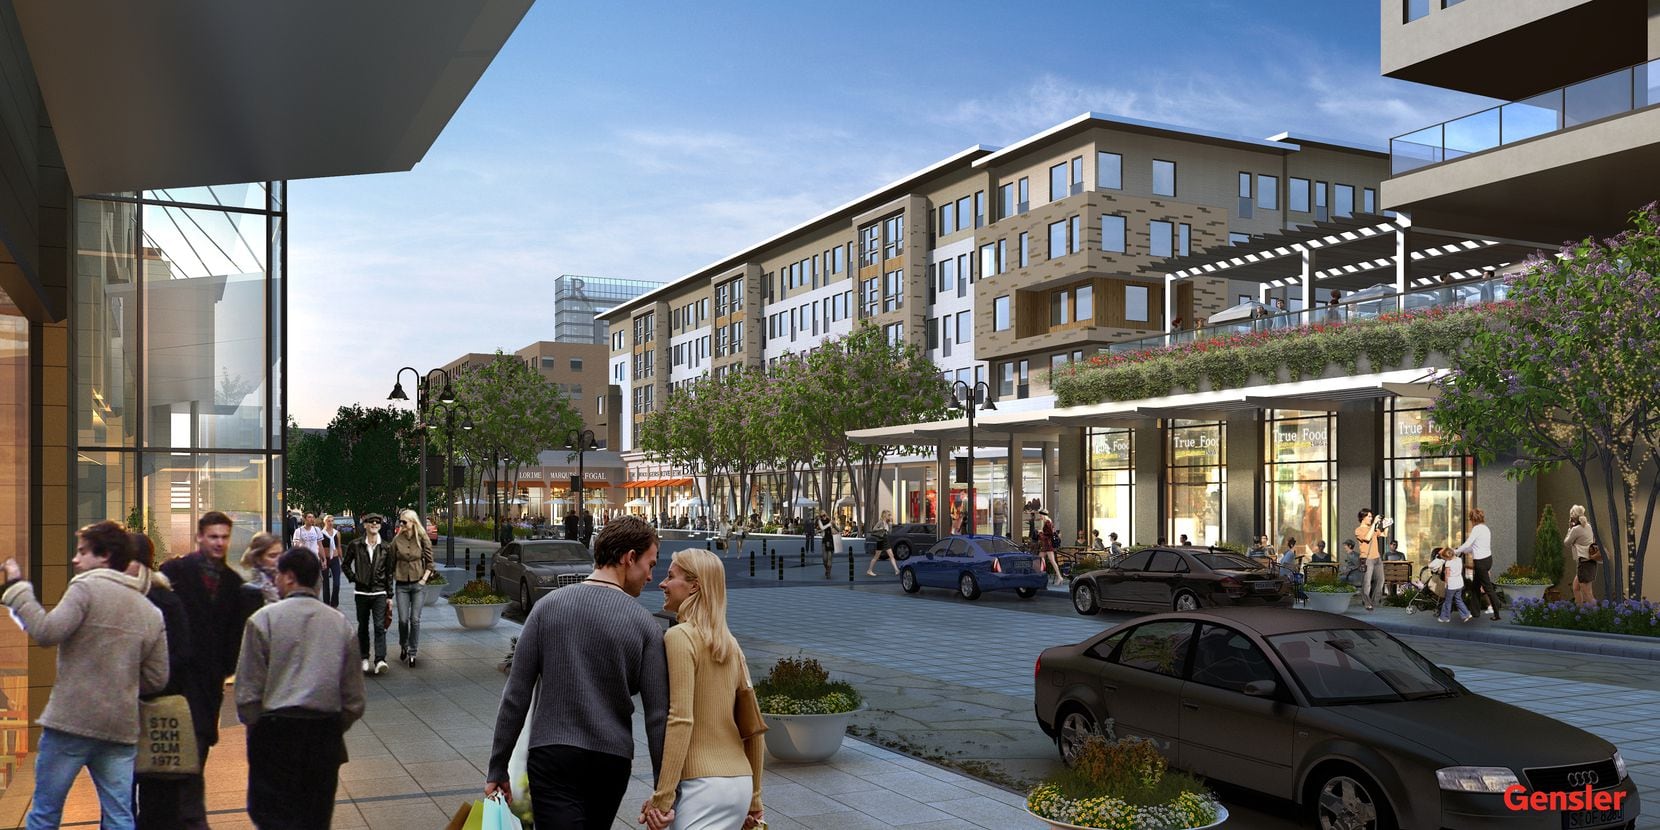 The first shops and restaurants open in the $500 million Legacy West Urban Village in March.